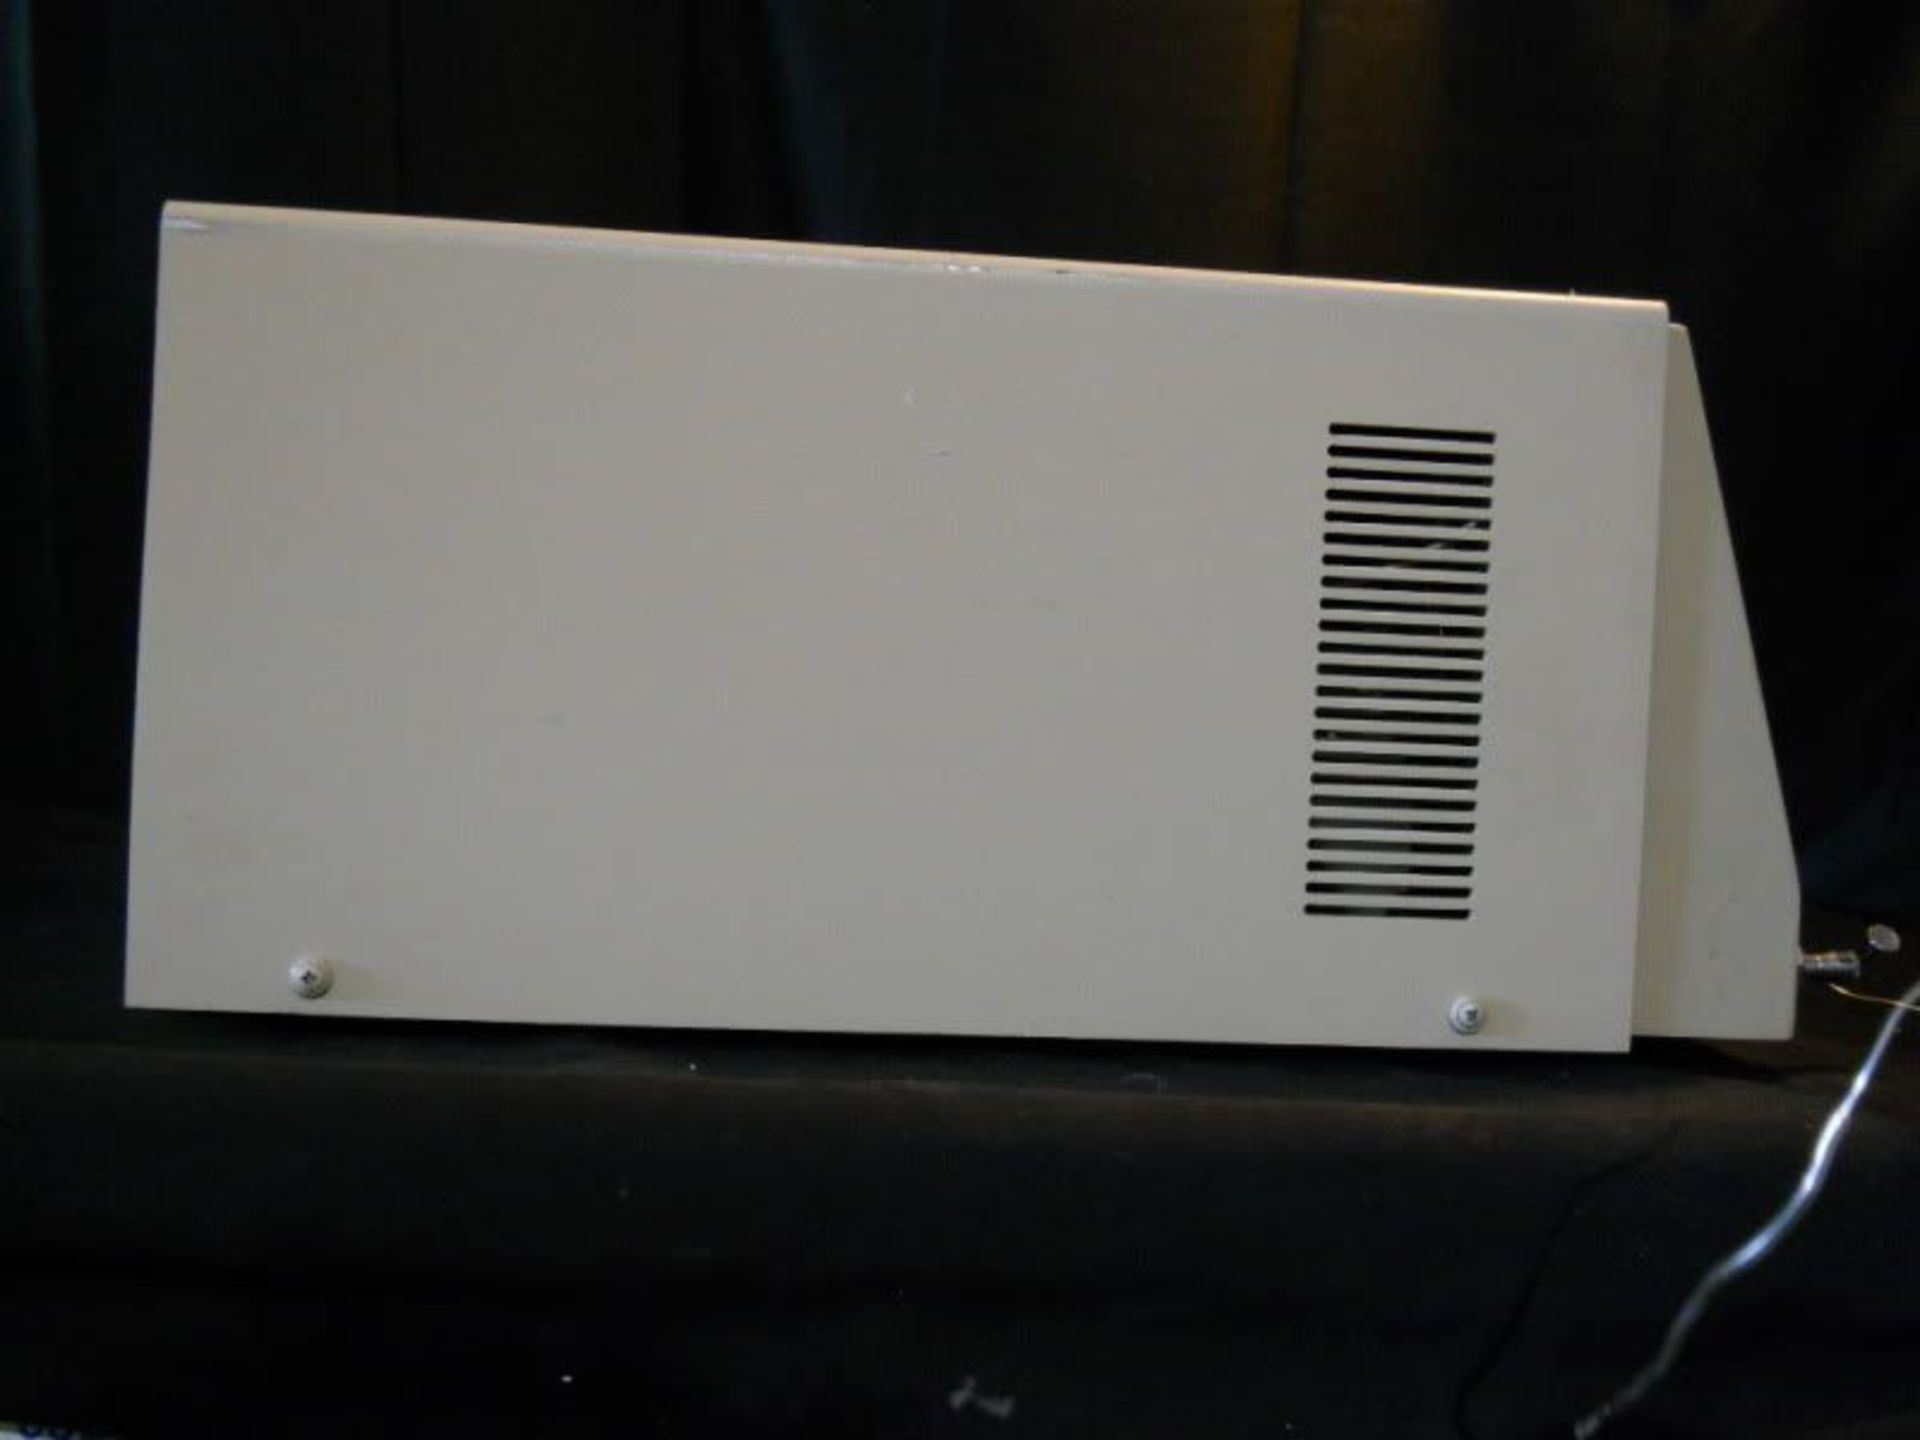 Millipore Waters 484 Tunable Absorbance Detector HPLC, Qty 1, 221177707627 - Image 7 of 7